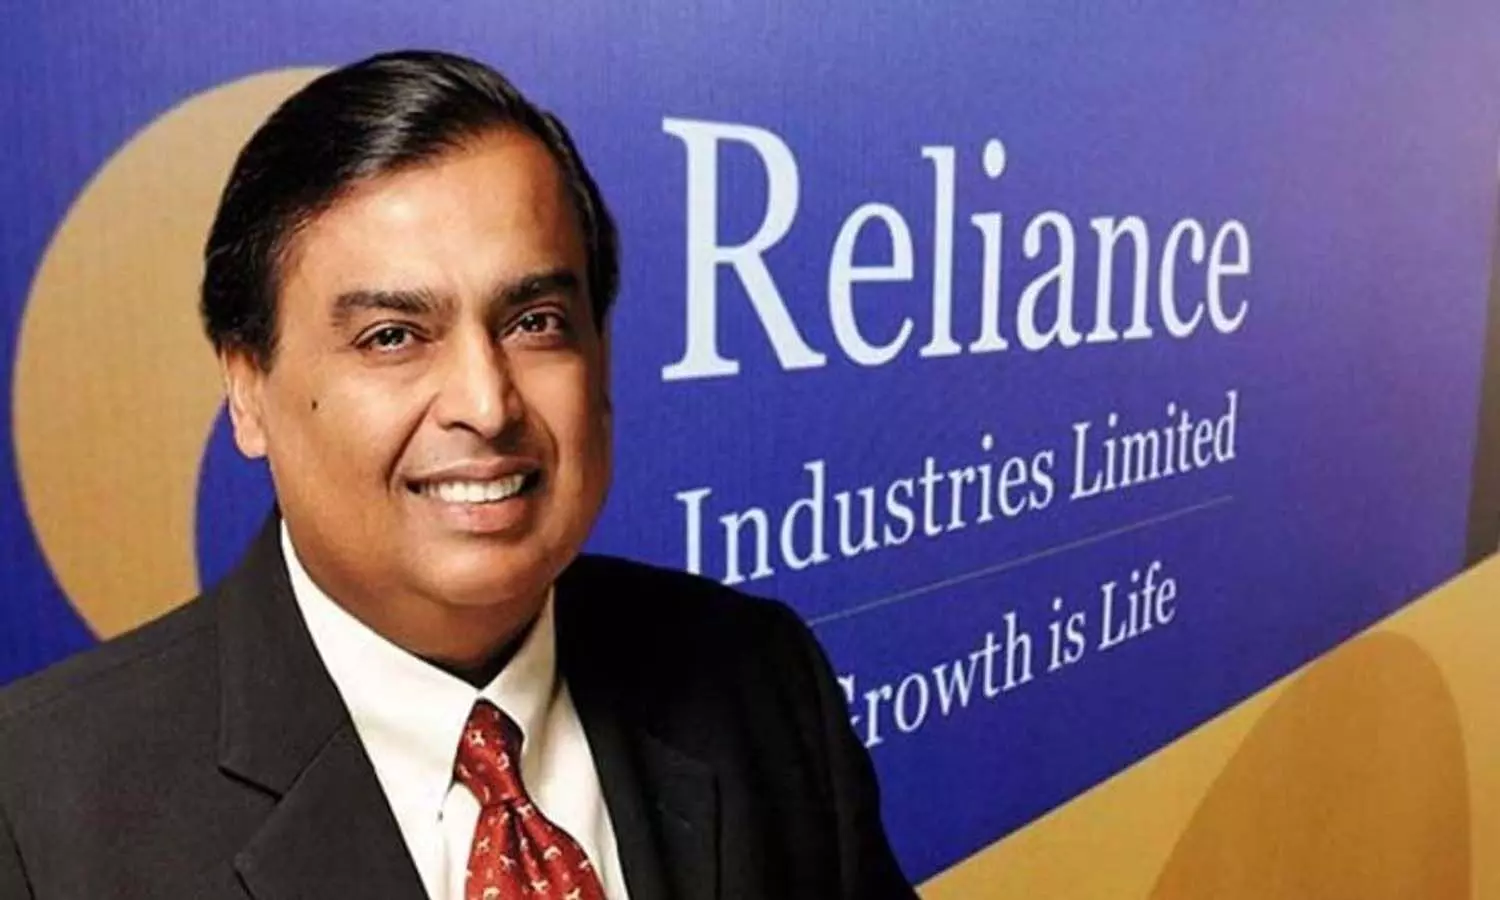 Reliance will acquire solar company Senshawk for $ 302 million, RIL will strengthen the field of solar energy